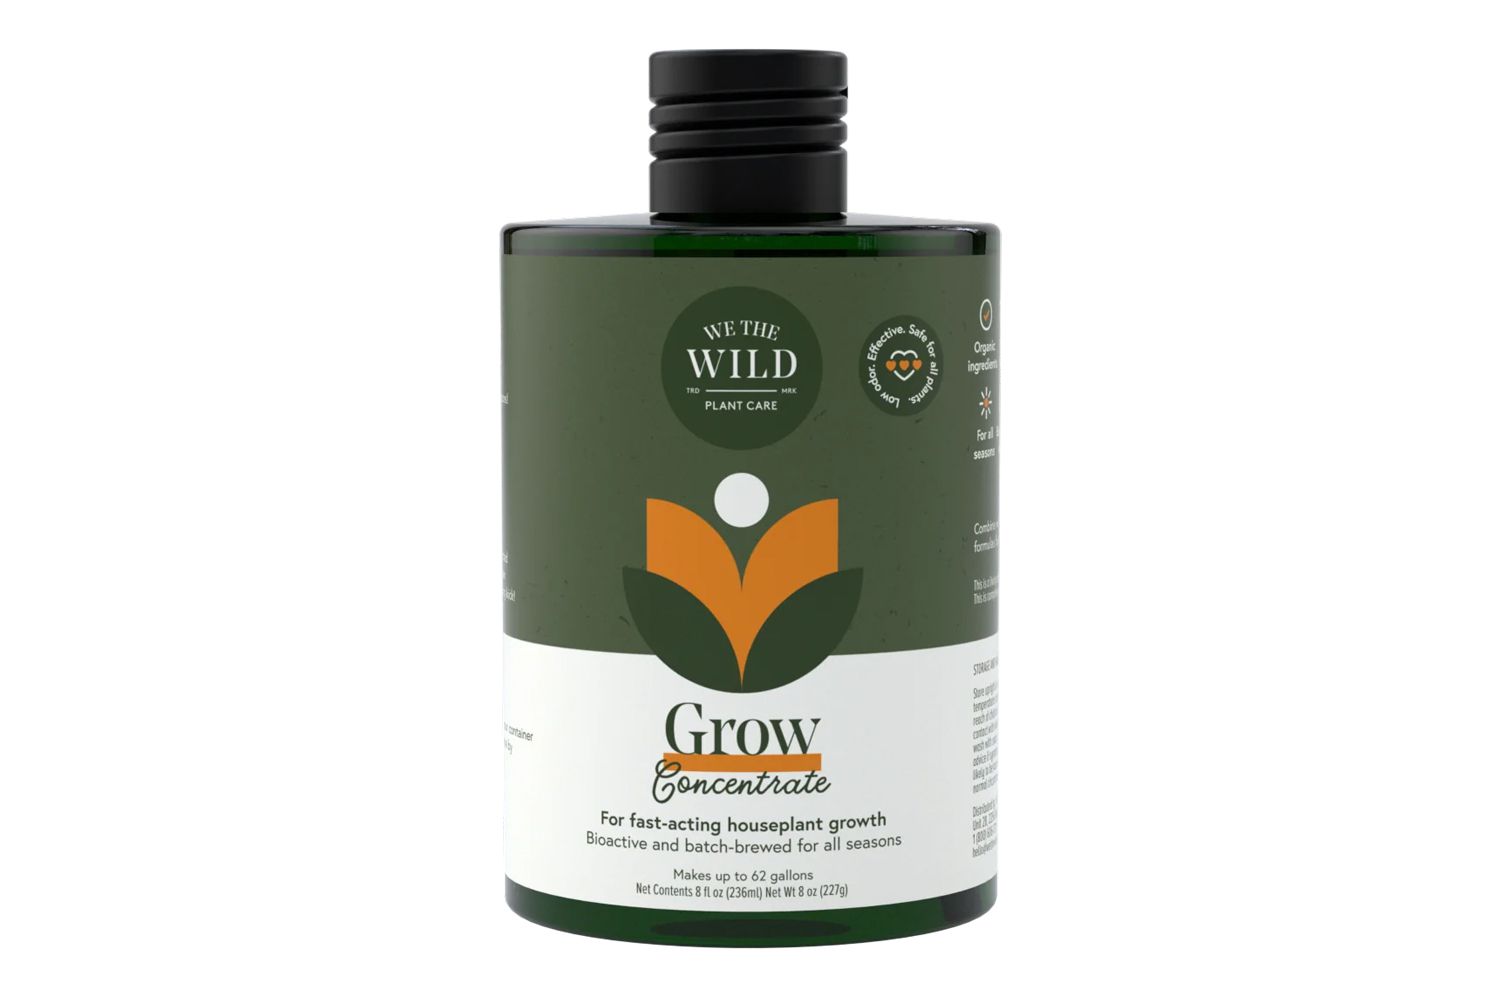 We the Wild Grow Concentrate